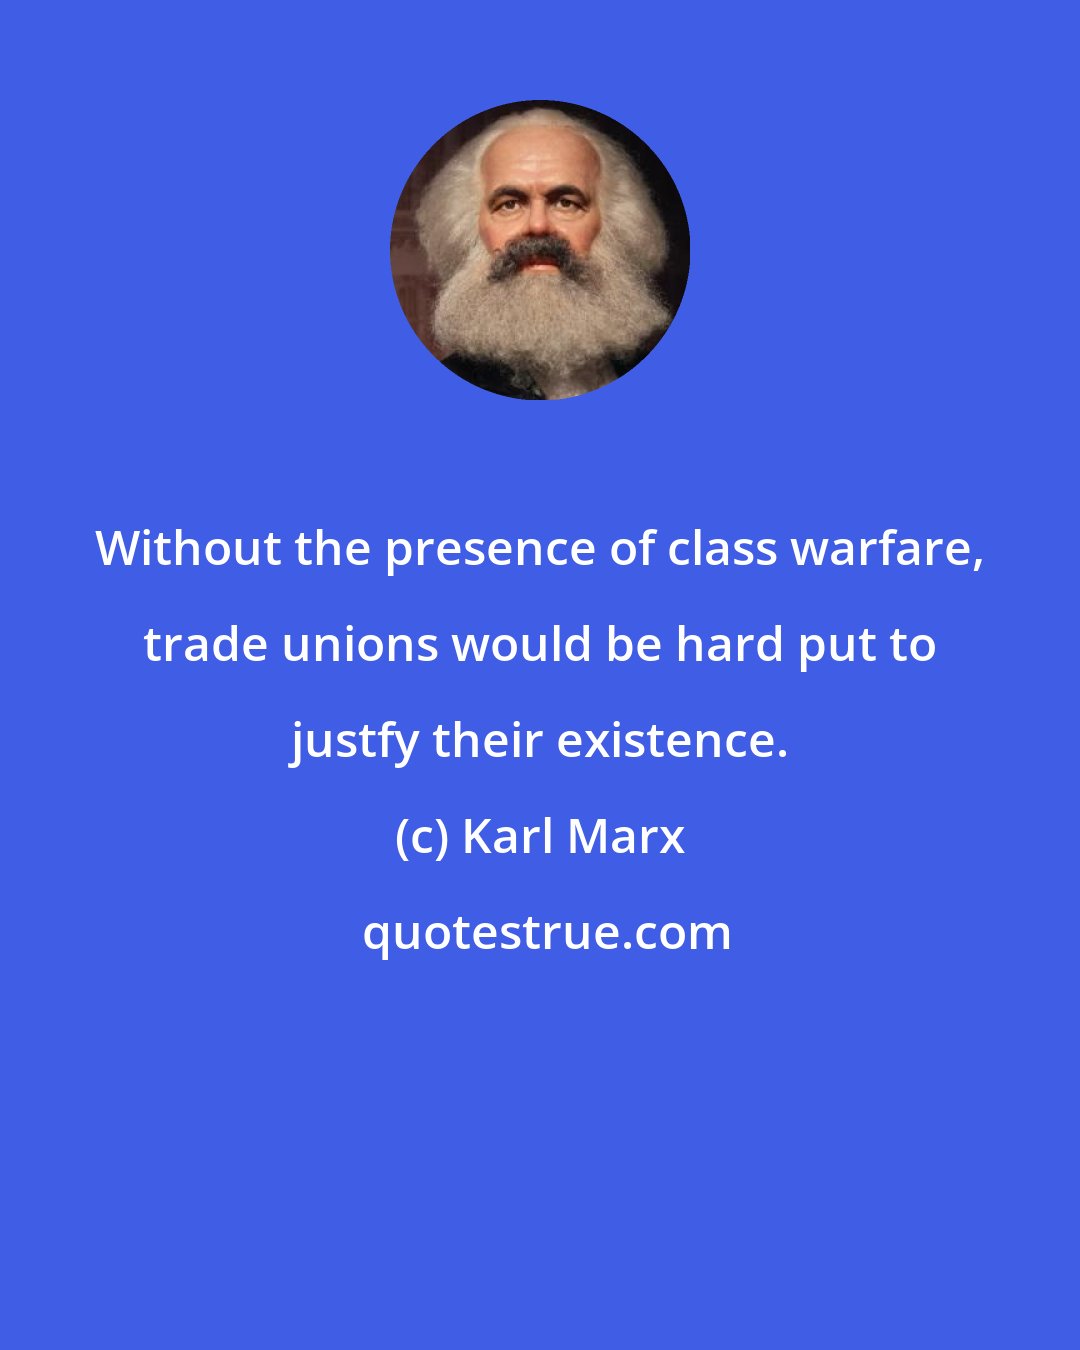 Karl Marx: Without the presence of class warfare, trade unions would be hard put to justfy their existence.